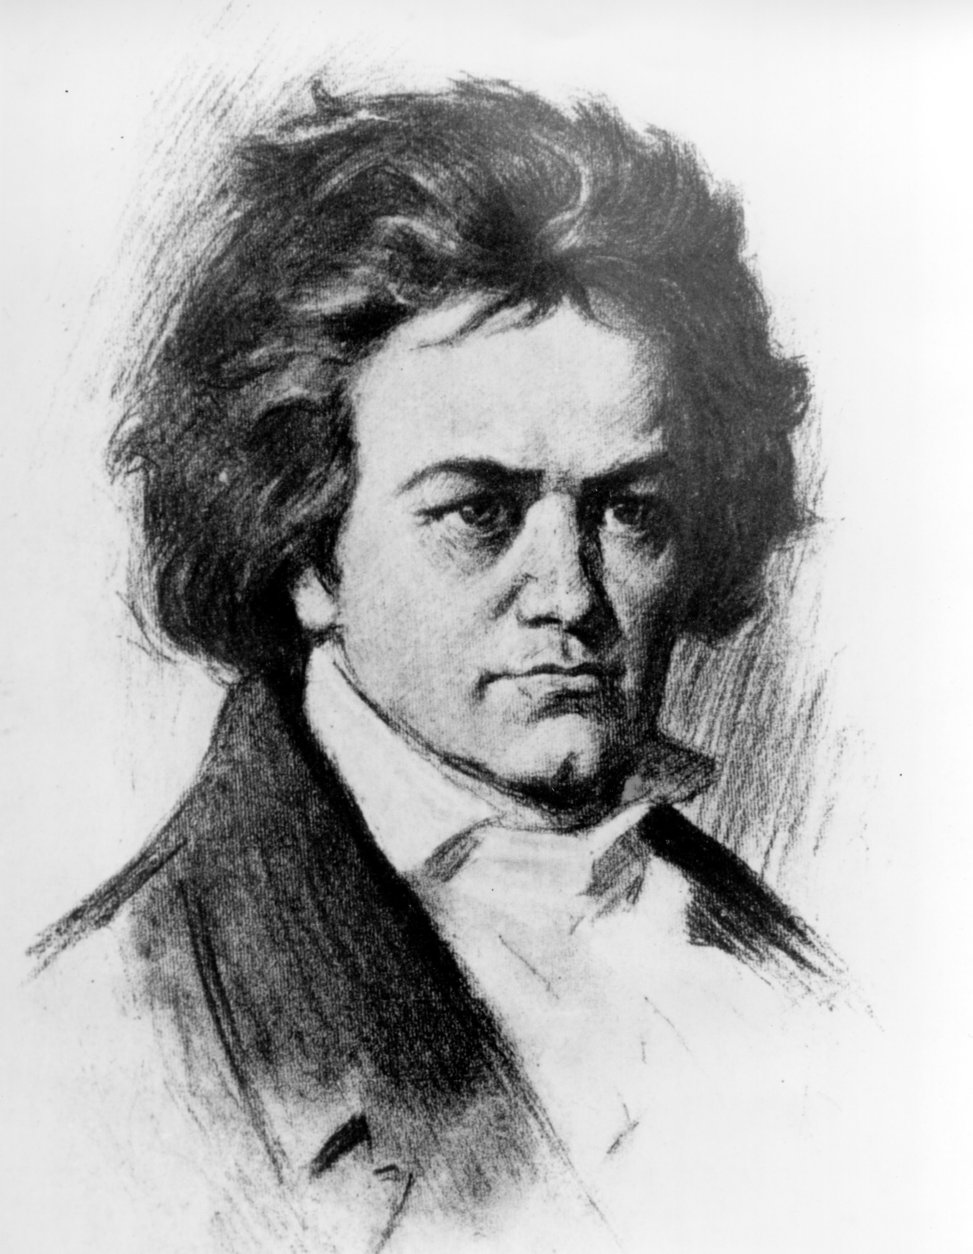 This is an undated sketch of German composer Ludwig van Beethoven.  Beethoven was born in Bonn on Dec. 17, 1770 and died in Vienna on March 26, 1827.  (AP Photo)